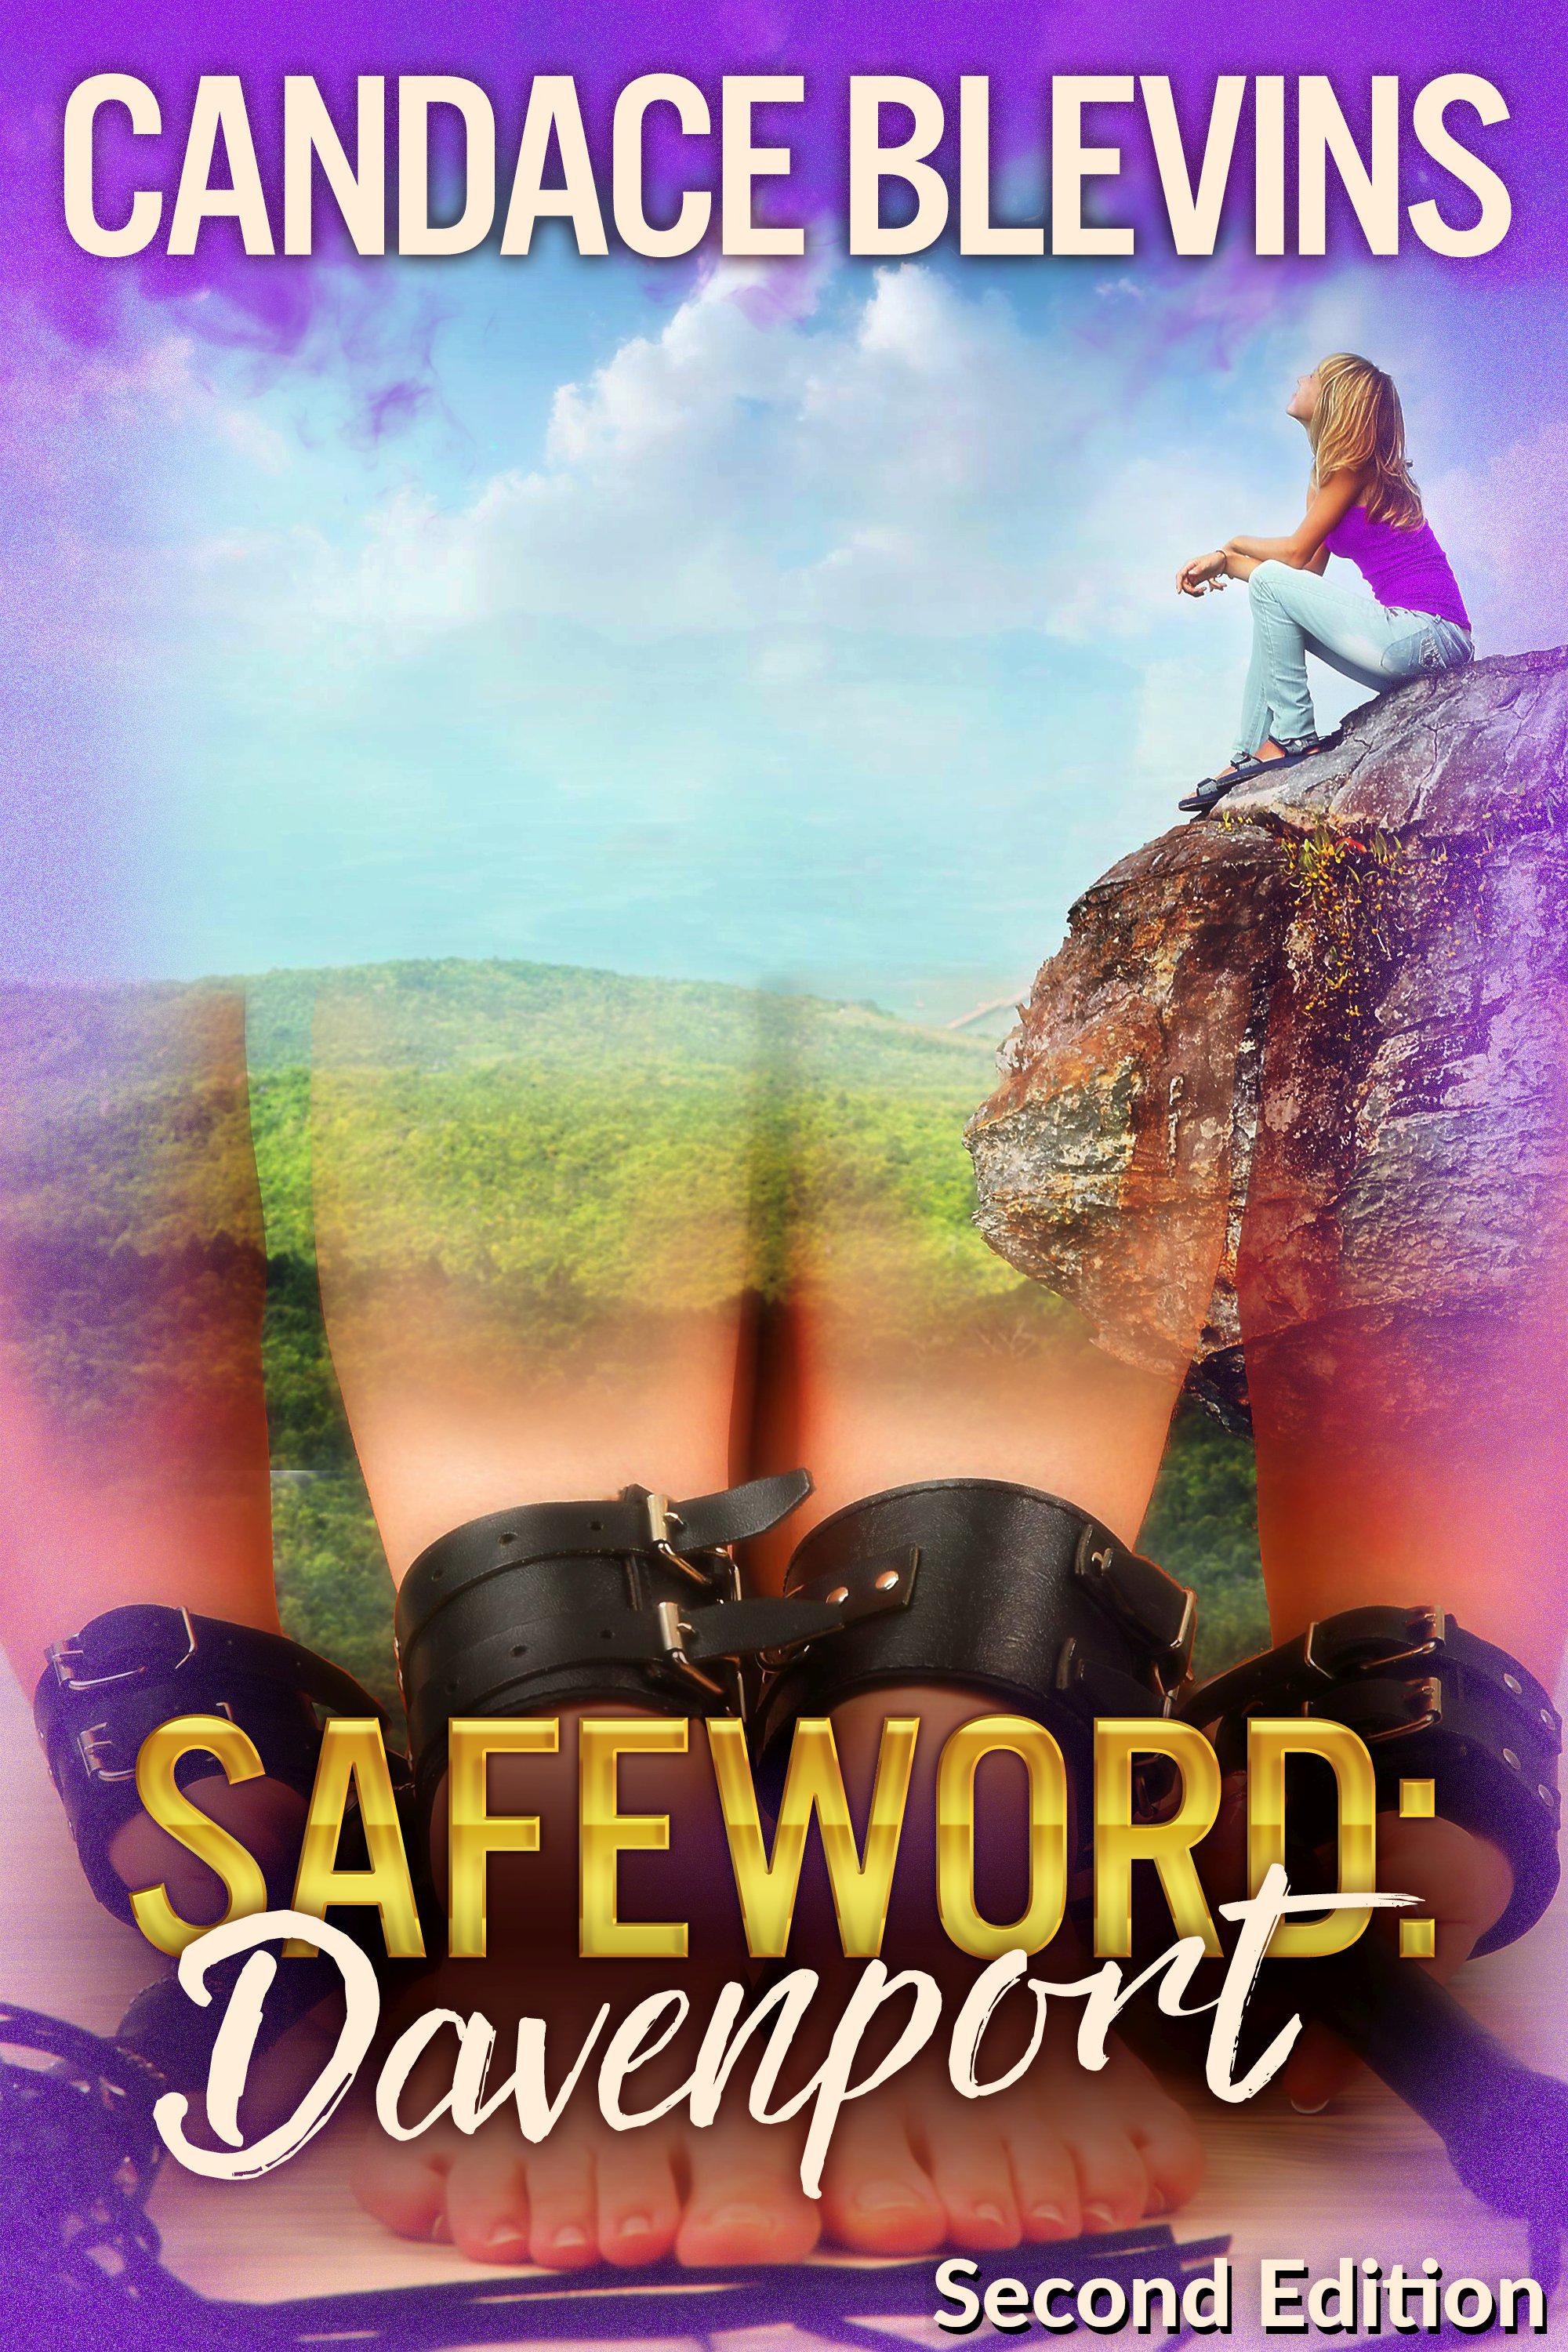 Safeword Davenport by Candace Blevins